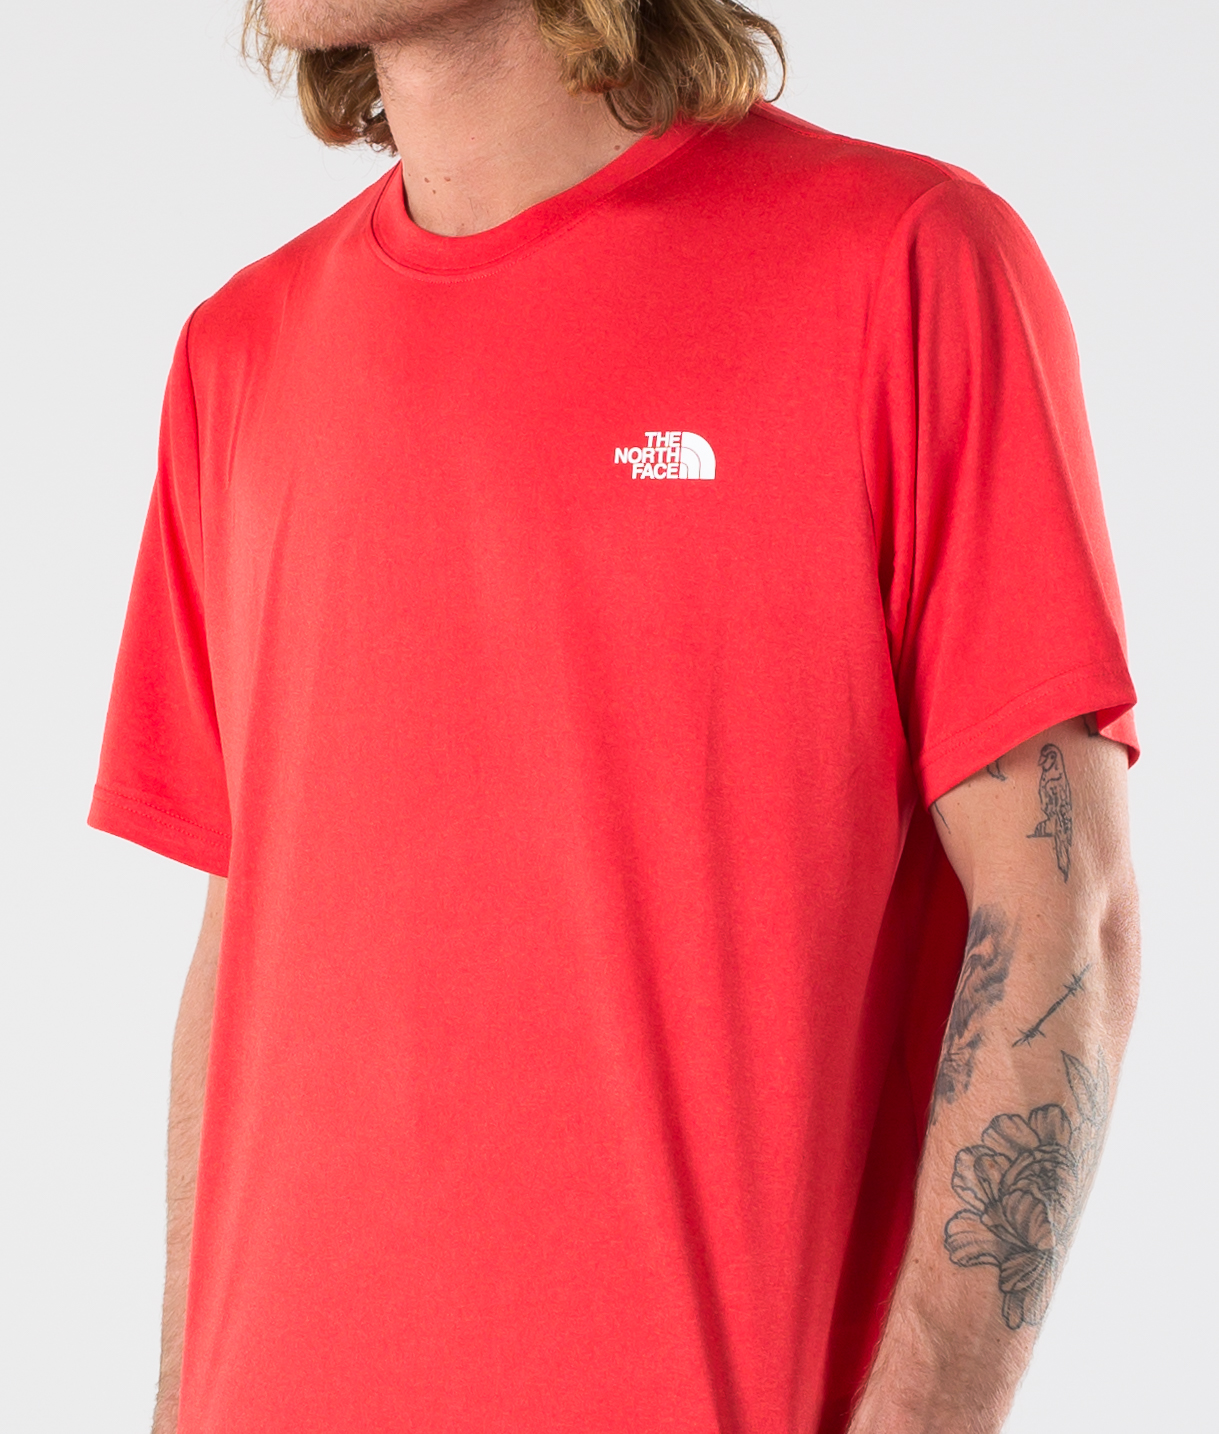 red north face shirt